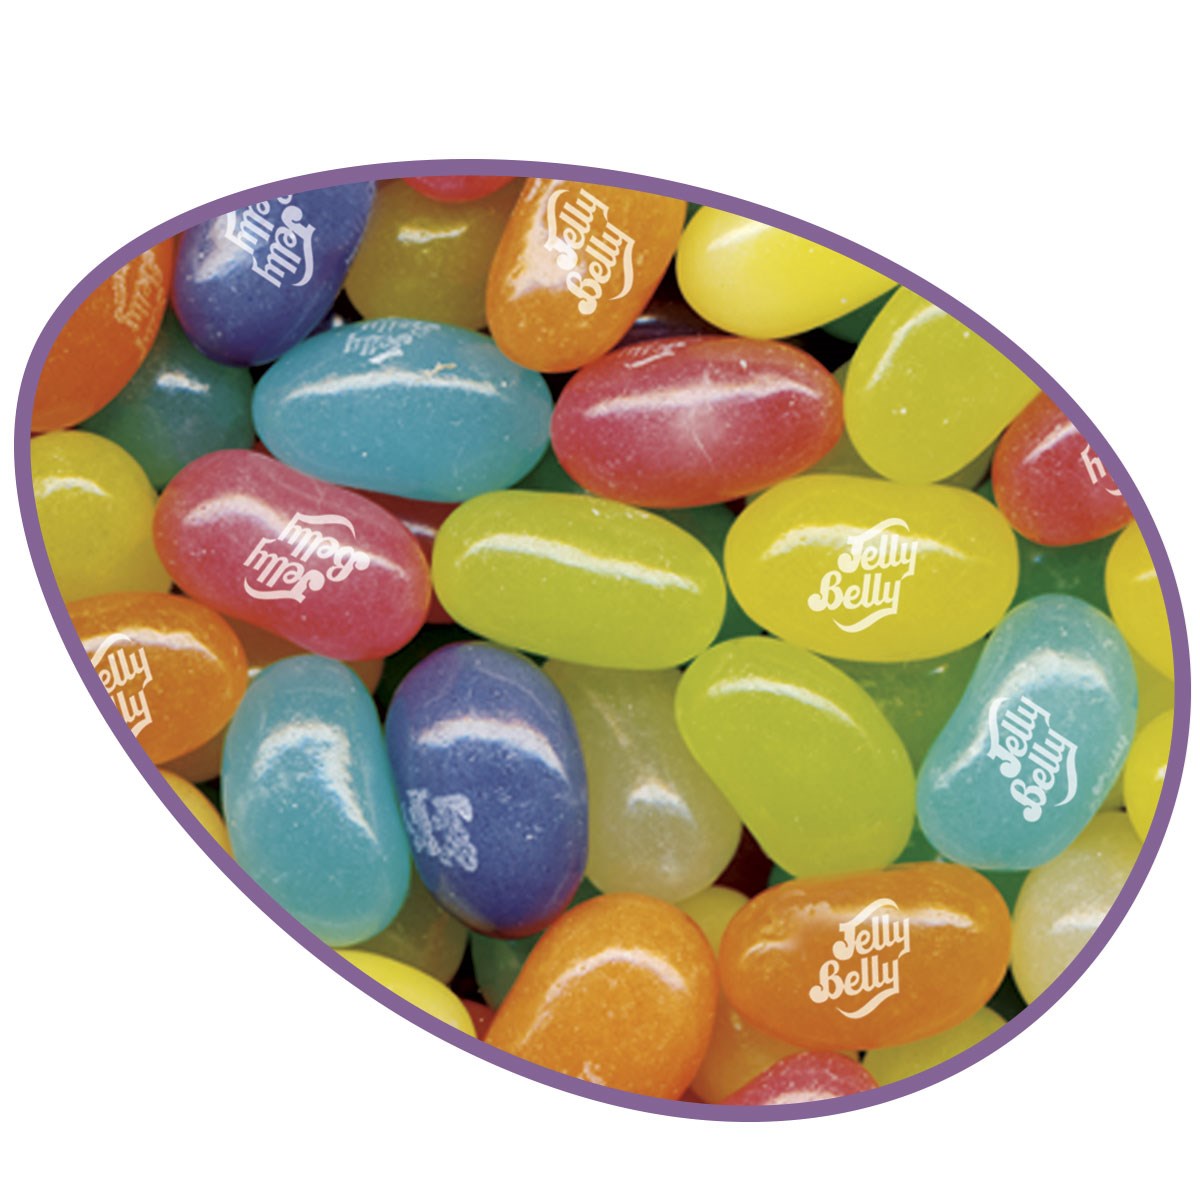 (G) JELLY BELLY - SPRING MIX (E)